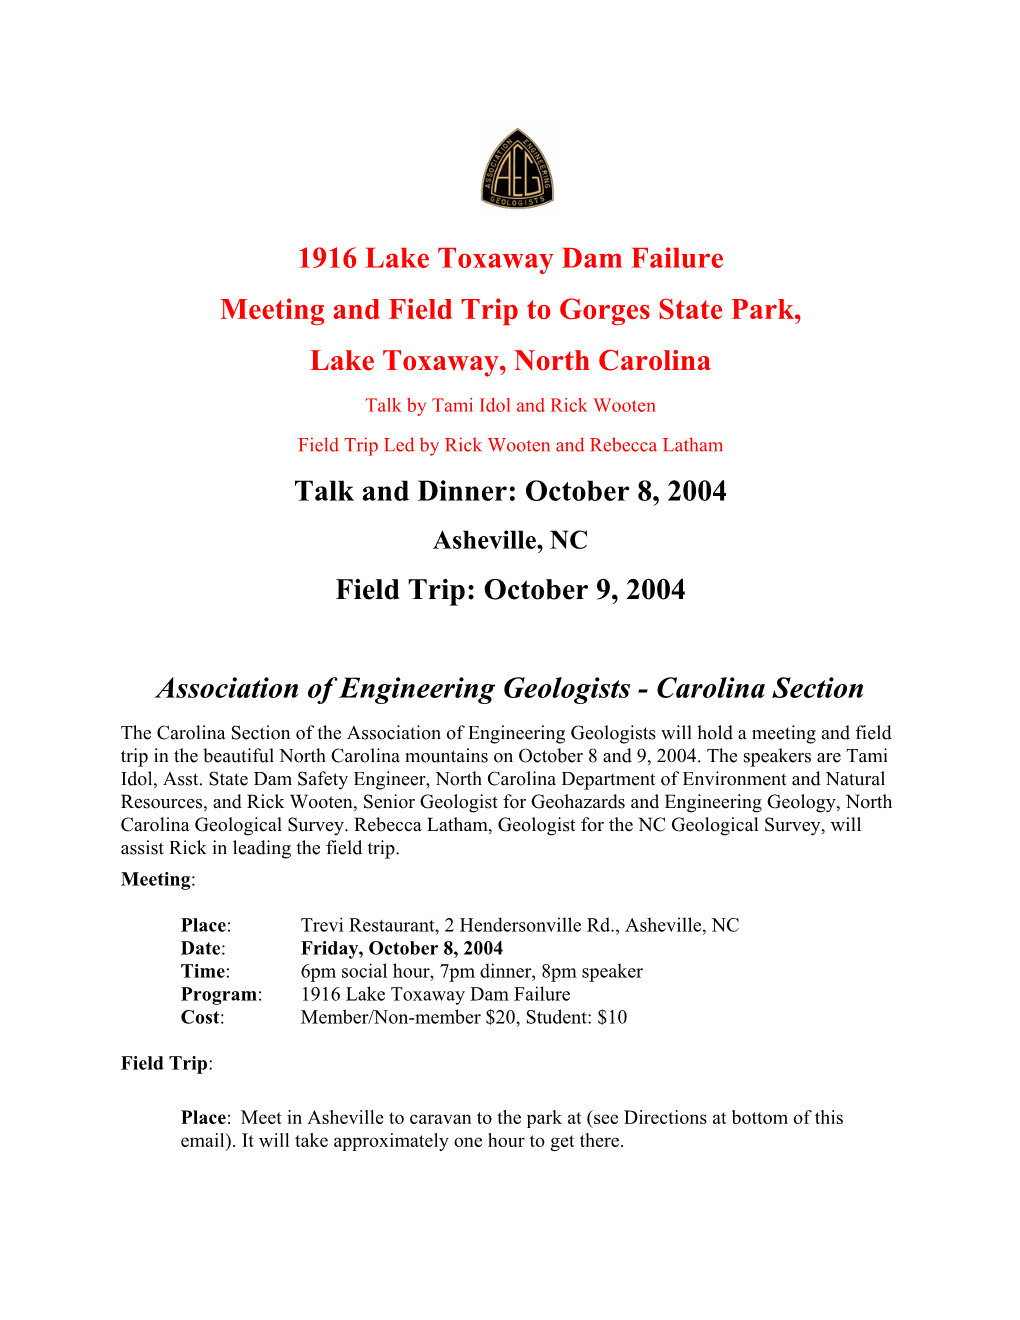 1916 Lake Toxaway Dam Failure Meeting and Field Trip to Gorges State Park